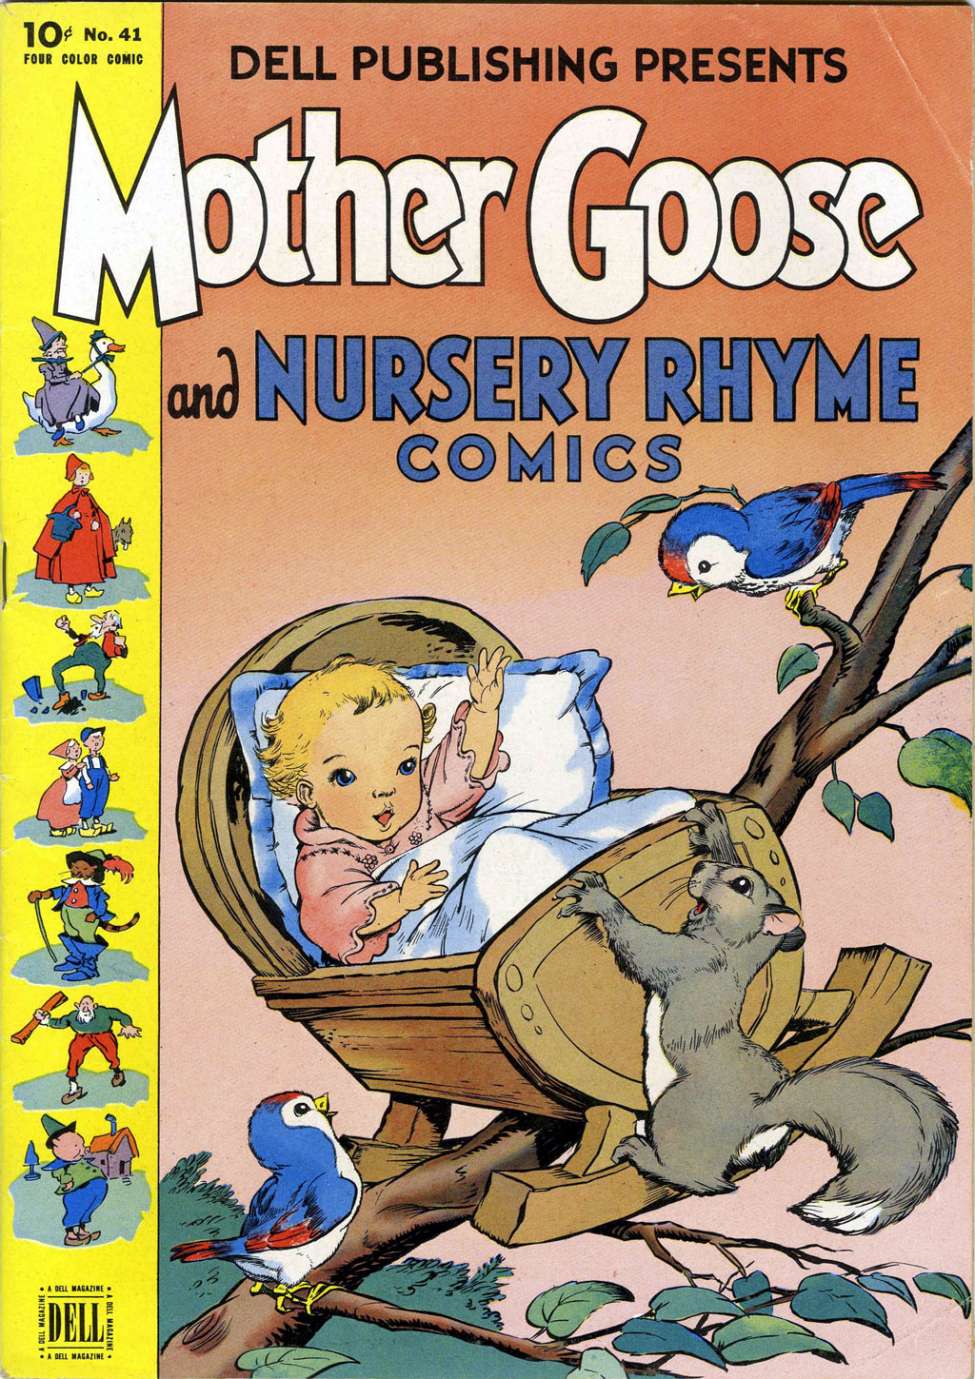 Book Cover For 0041 - Mother Goose and Nursery Rhyme Comics